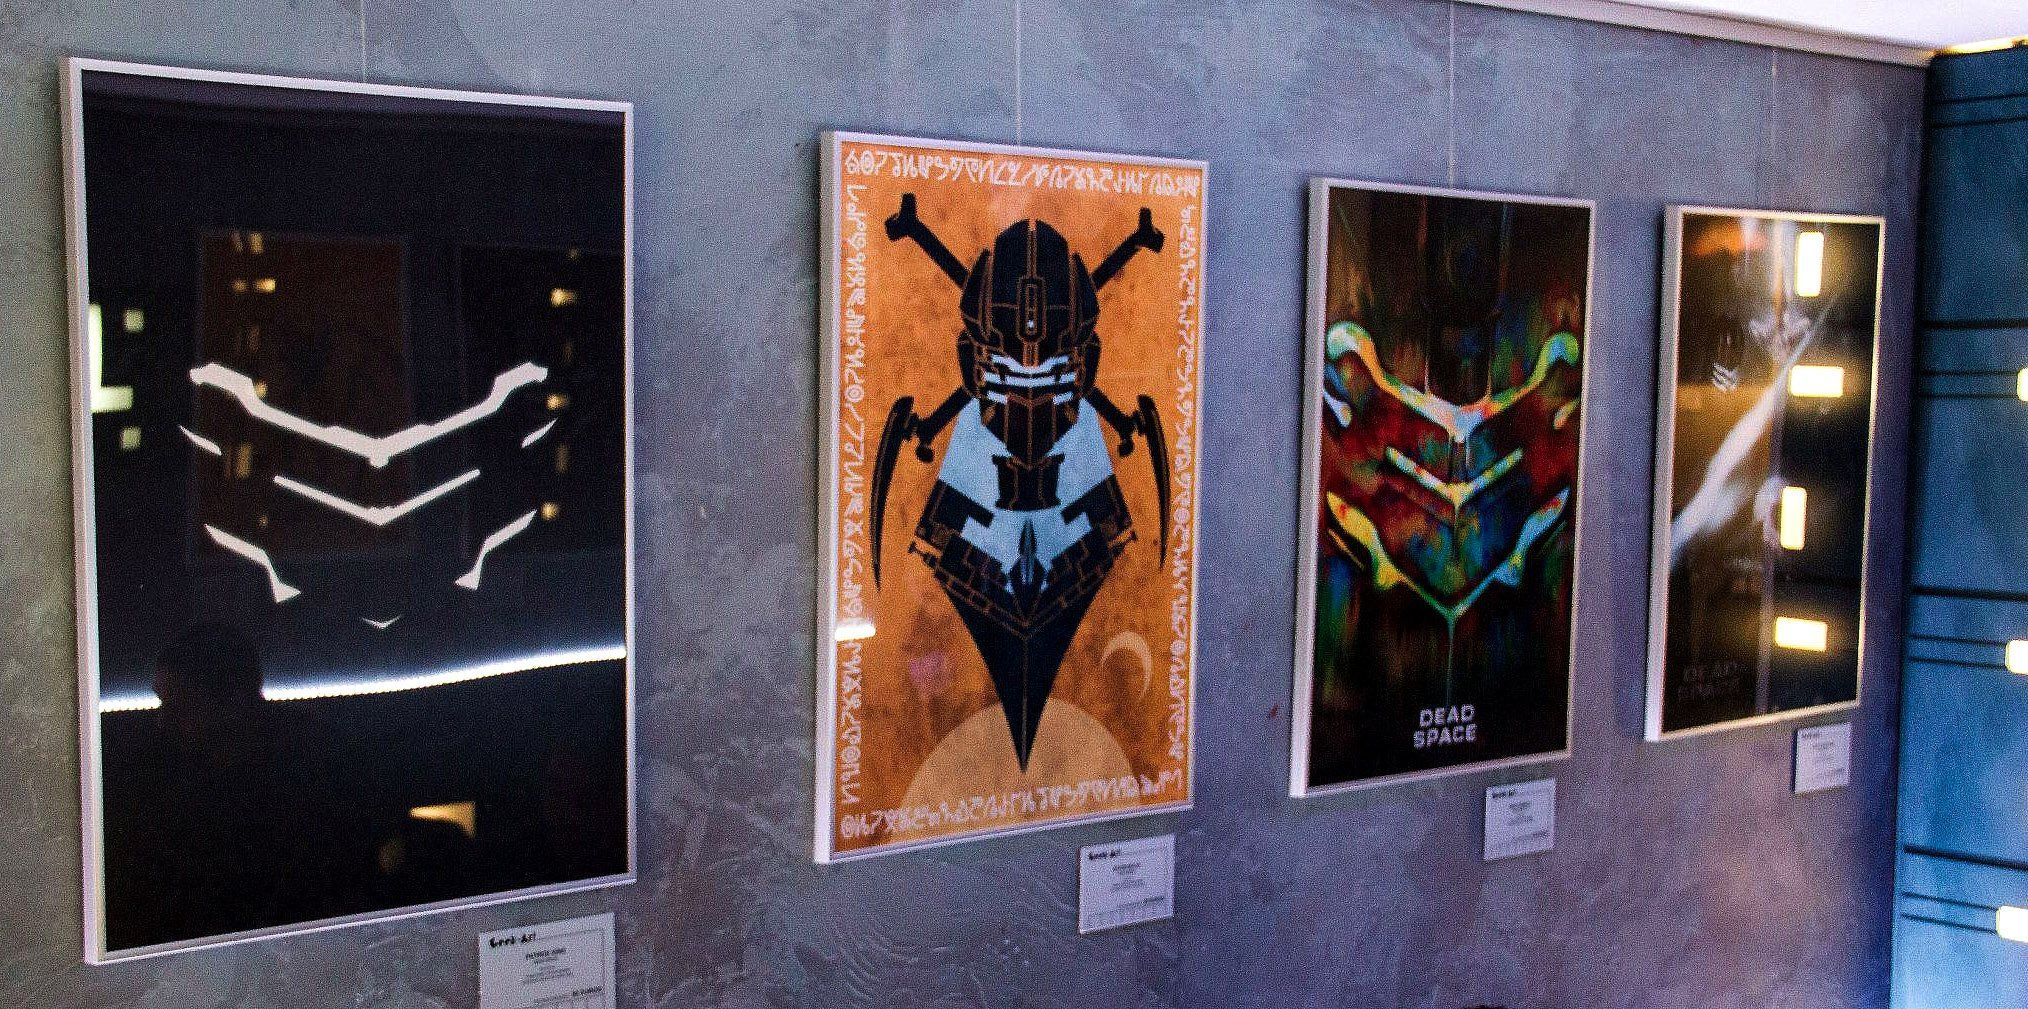 Dead space l'expo #11